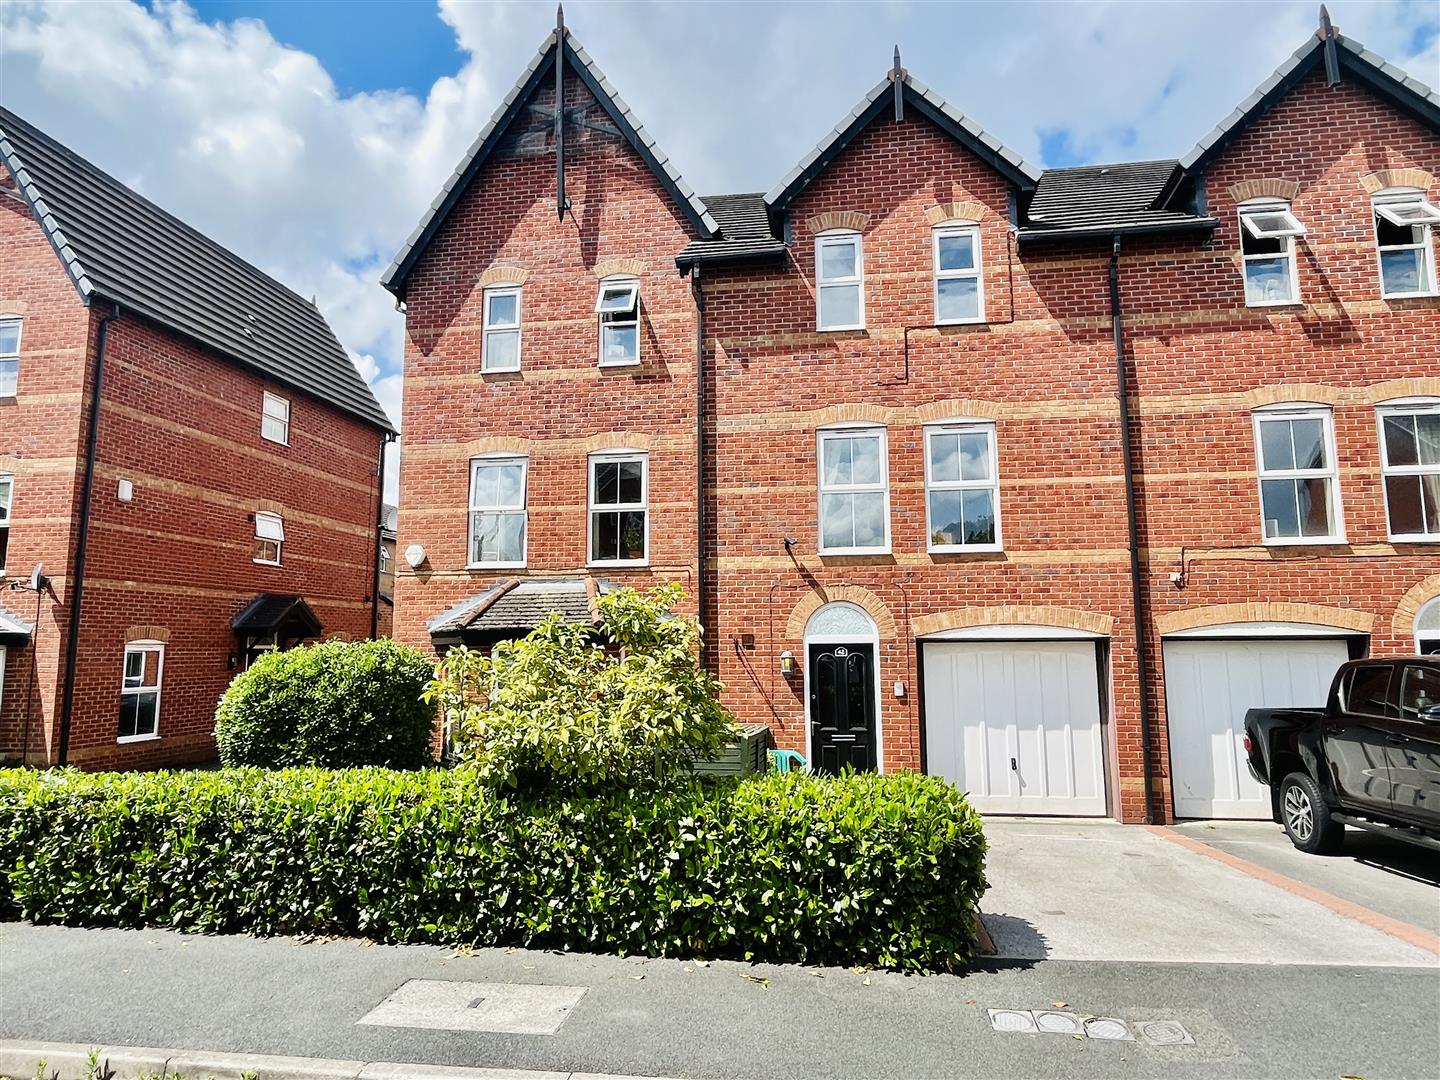 4 bed town house for sale in Welman Way, Altrincham - Property Image 1